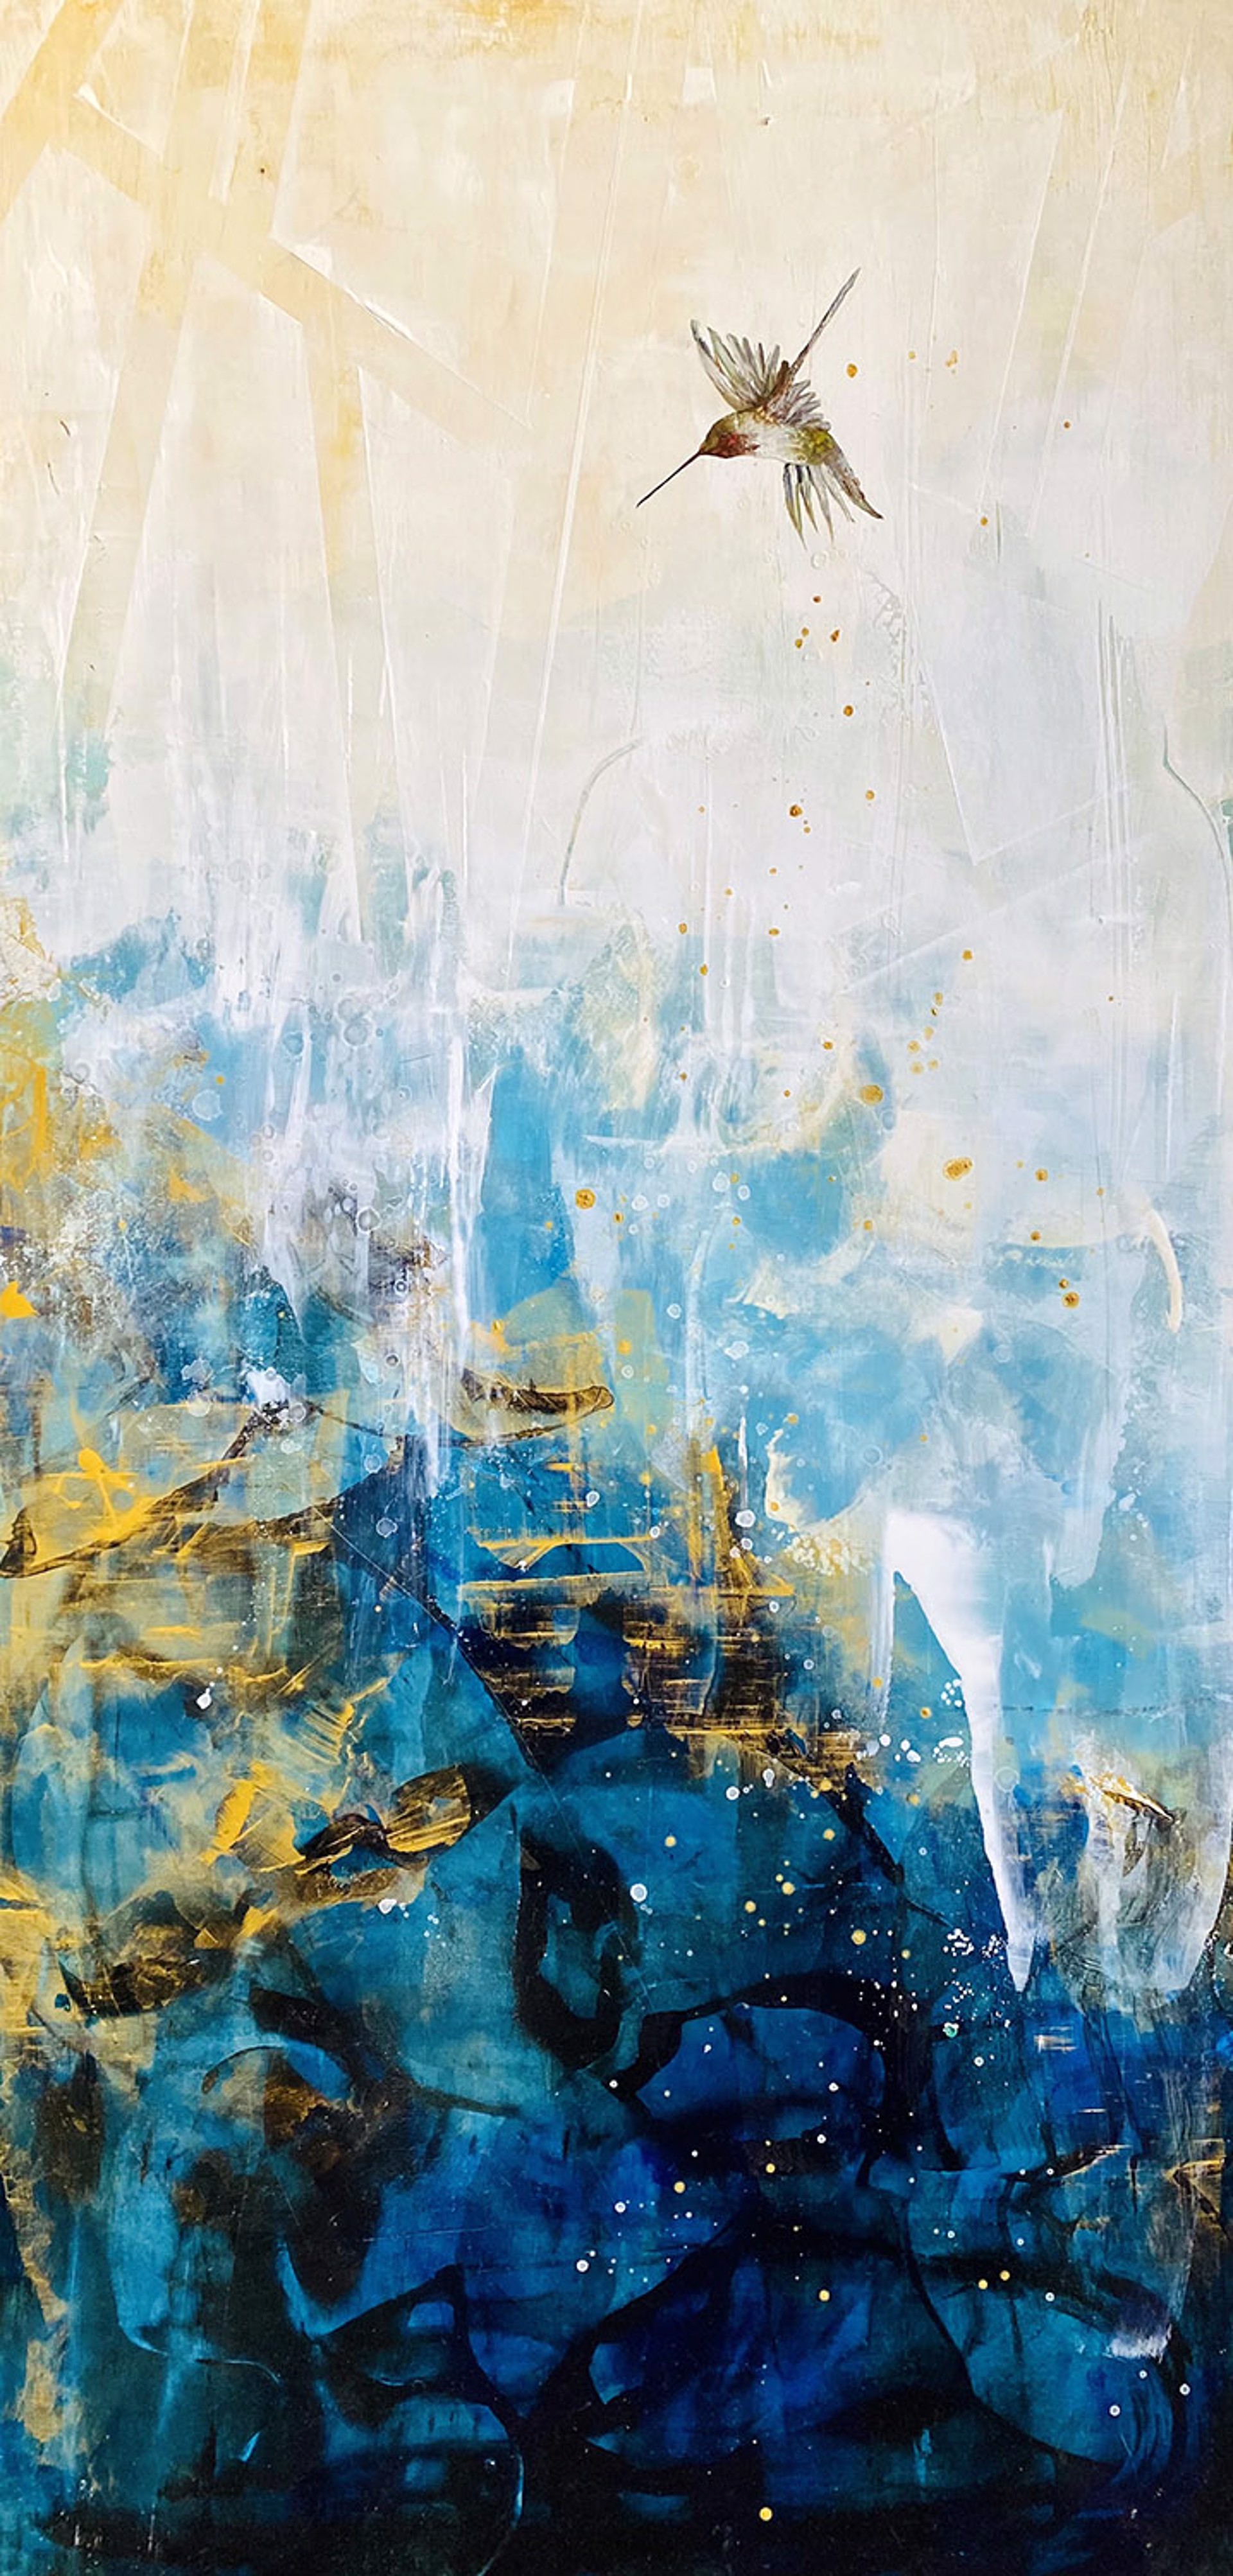 A Contemporary Painting Of A Flying Hummingbird On A Blue, Gold, And White Abstract Background By Jenna Von Benedikt At Gallery Wild